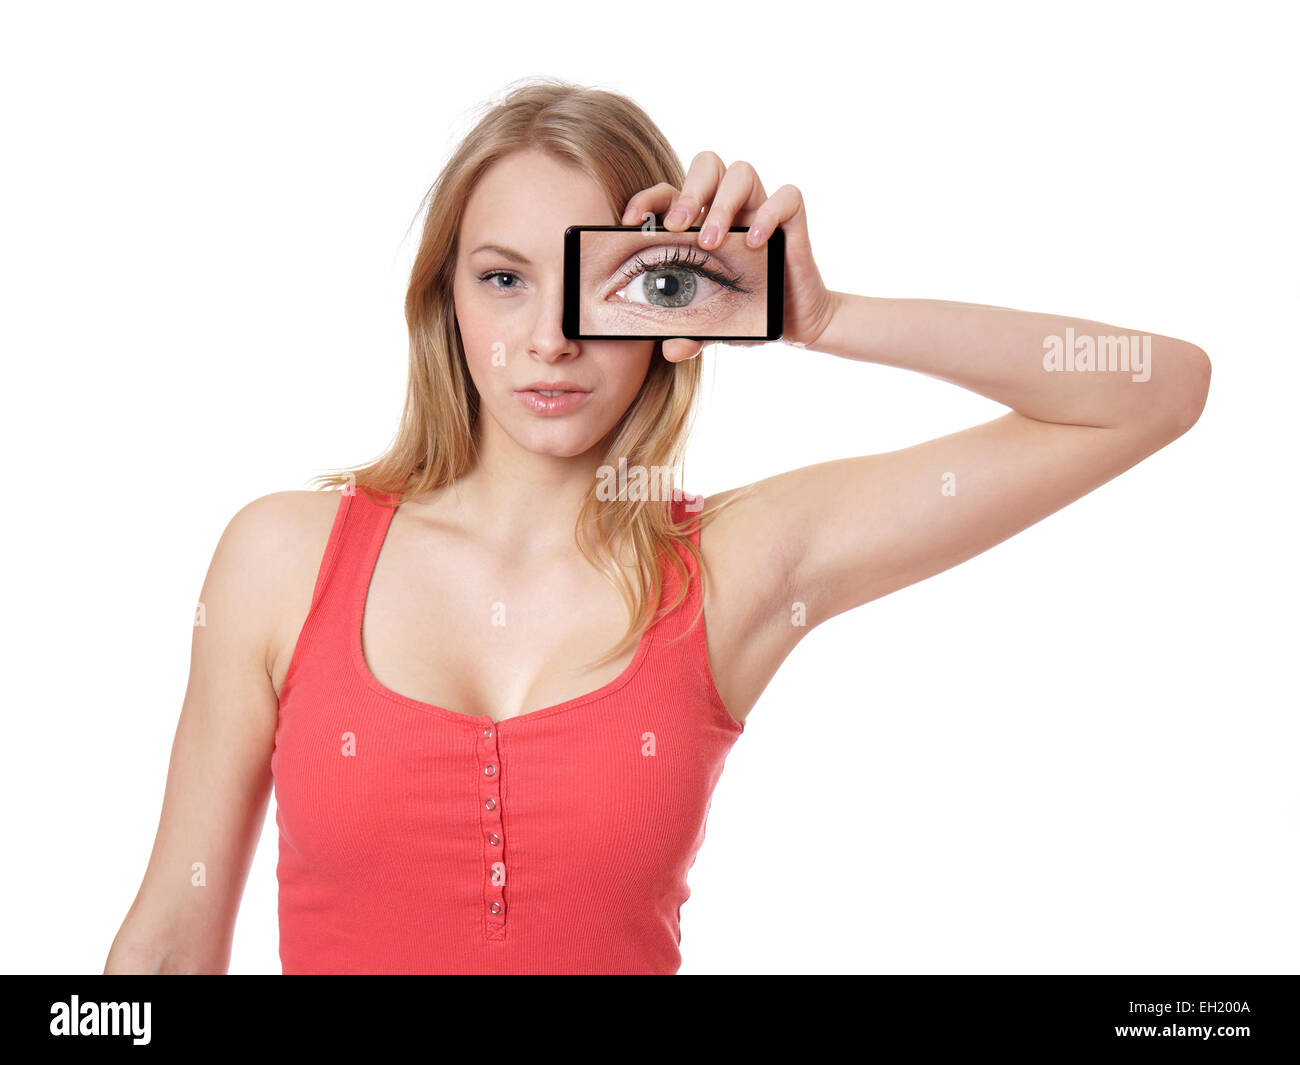 woman holding camera phone to her face Stock Photo